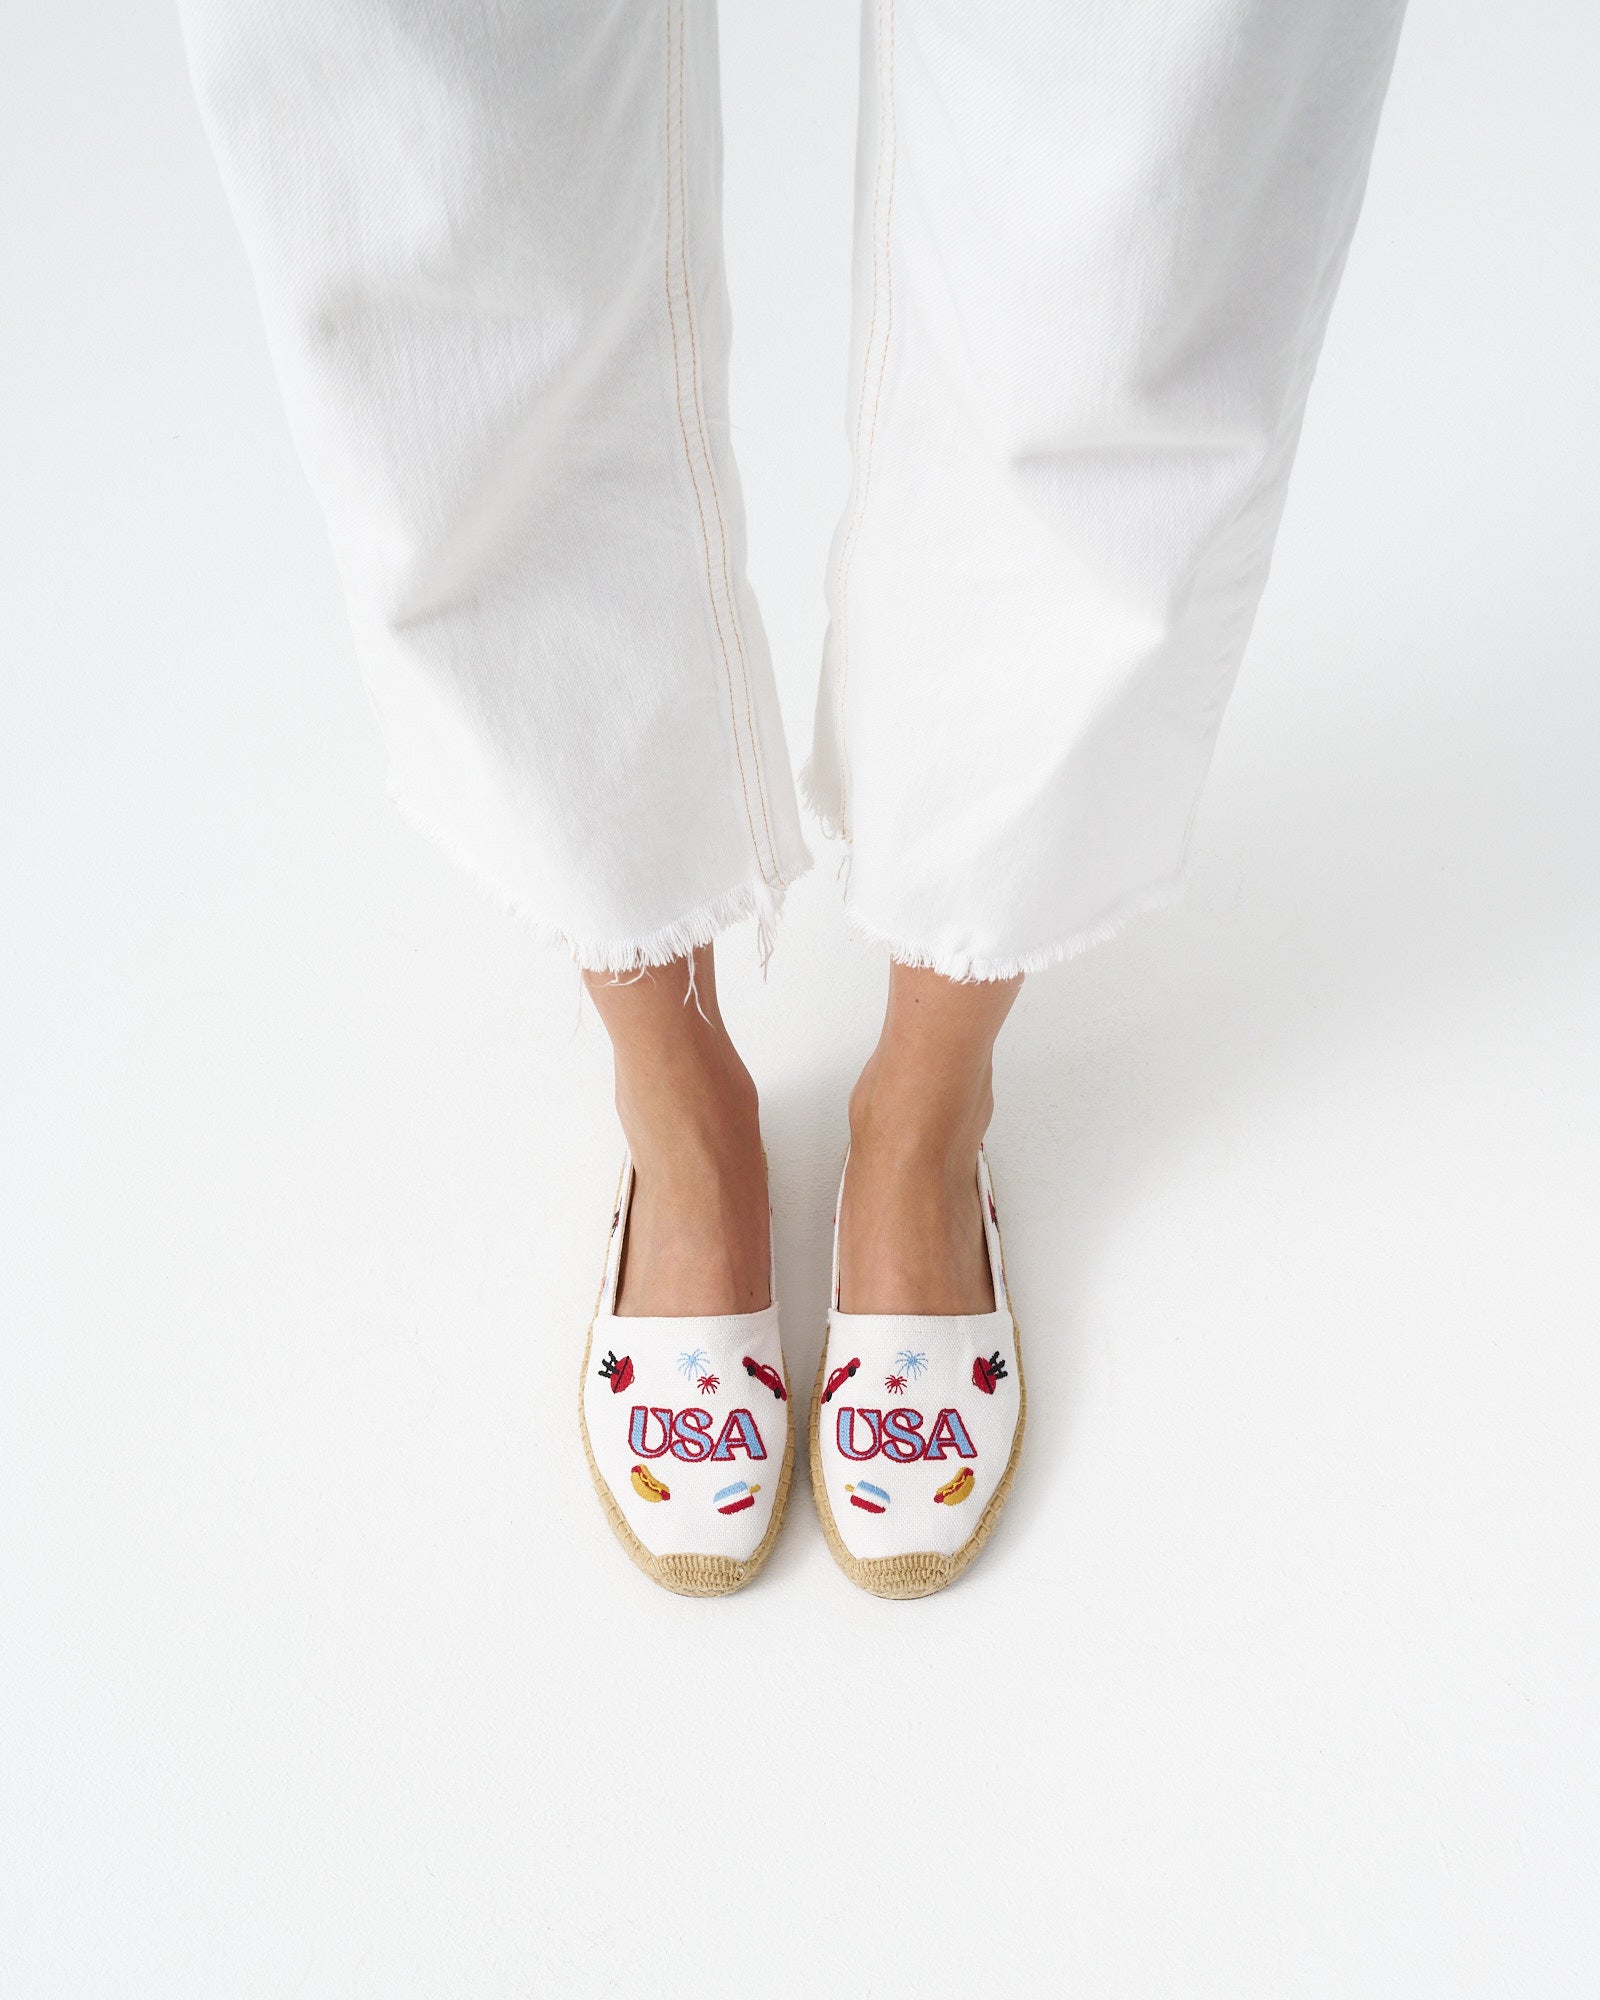 Overhead view of woman wearing white espadrilles with colorful USA embroidery on them